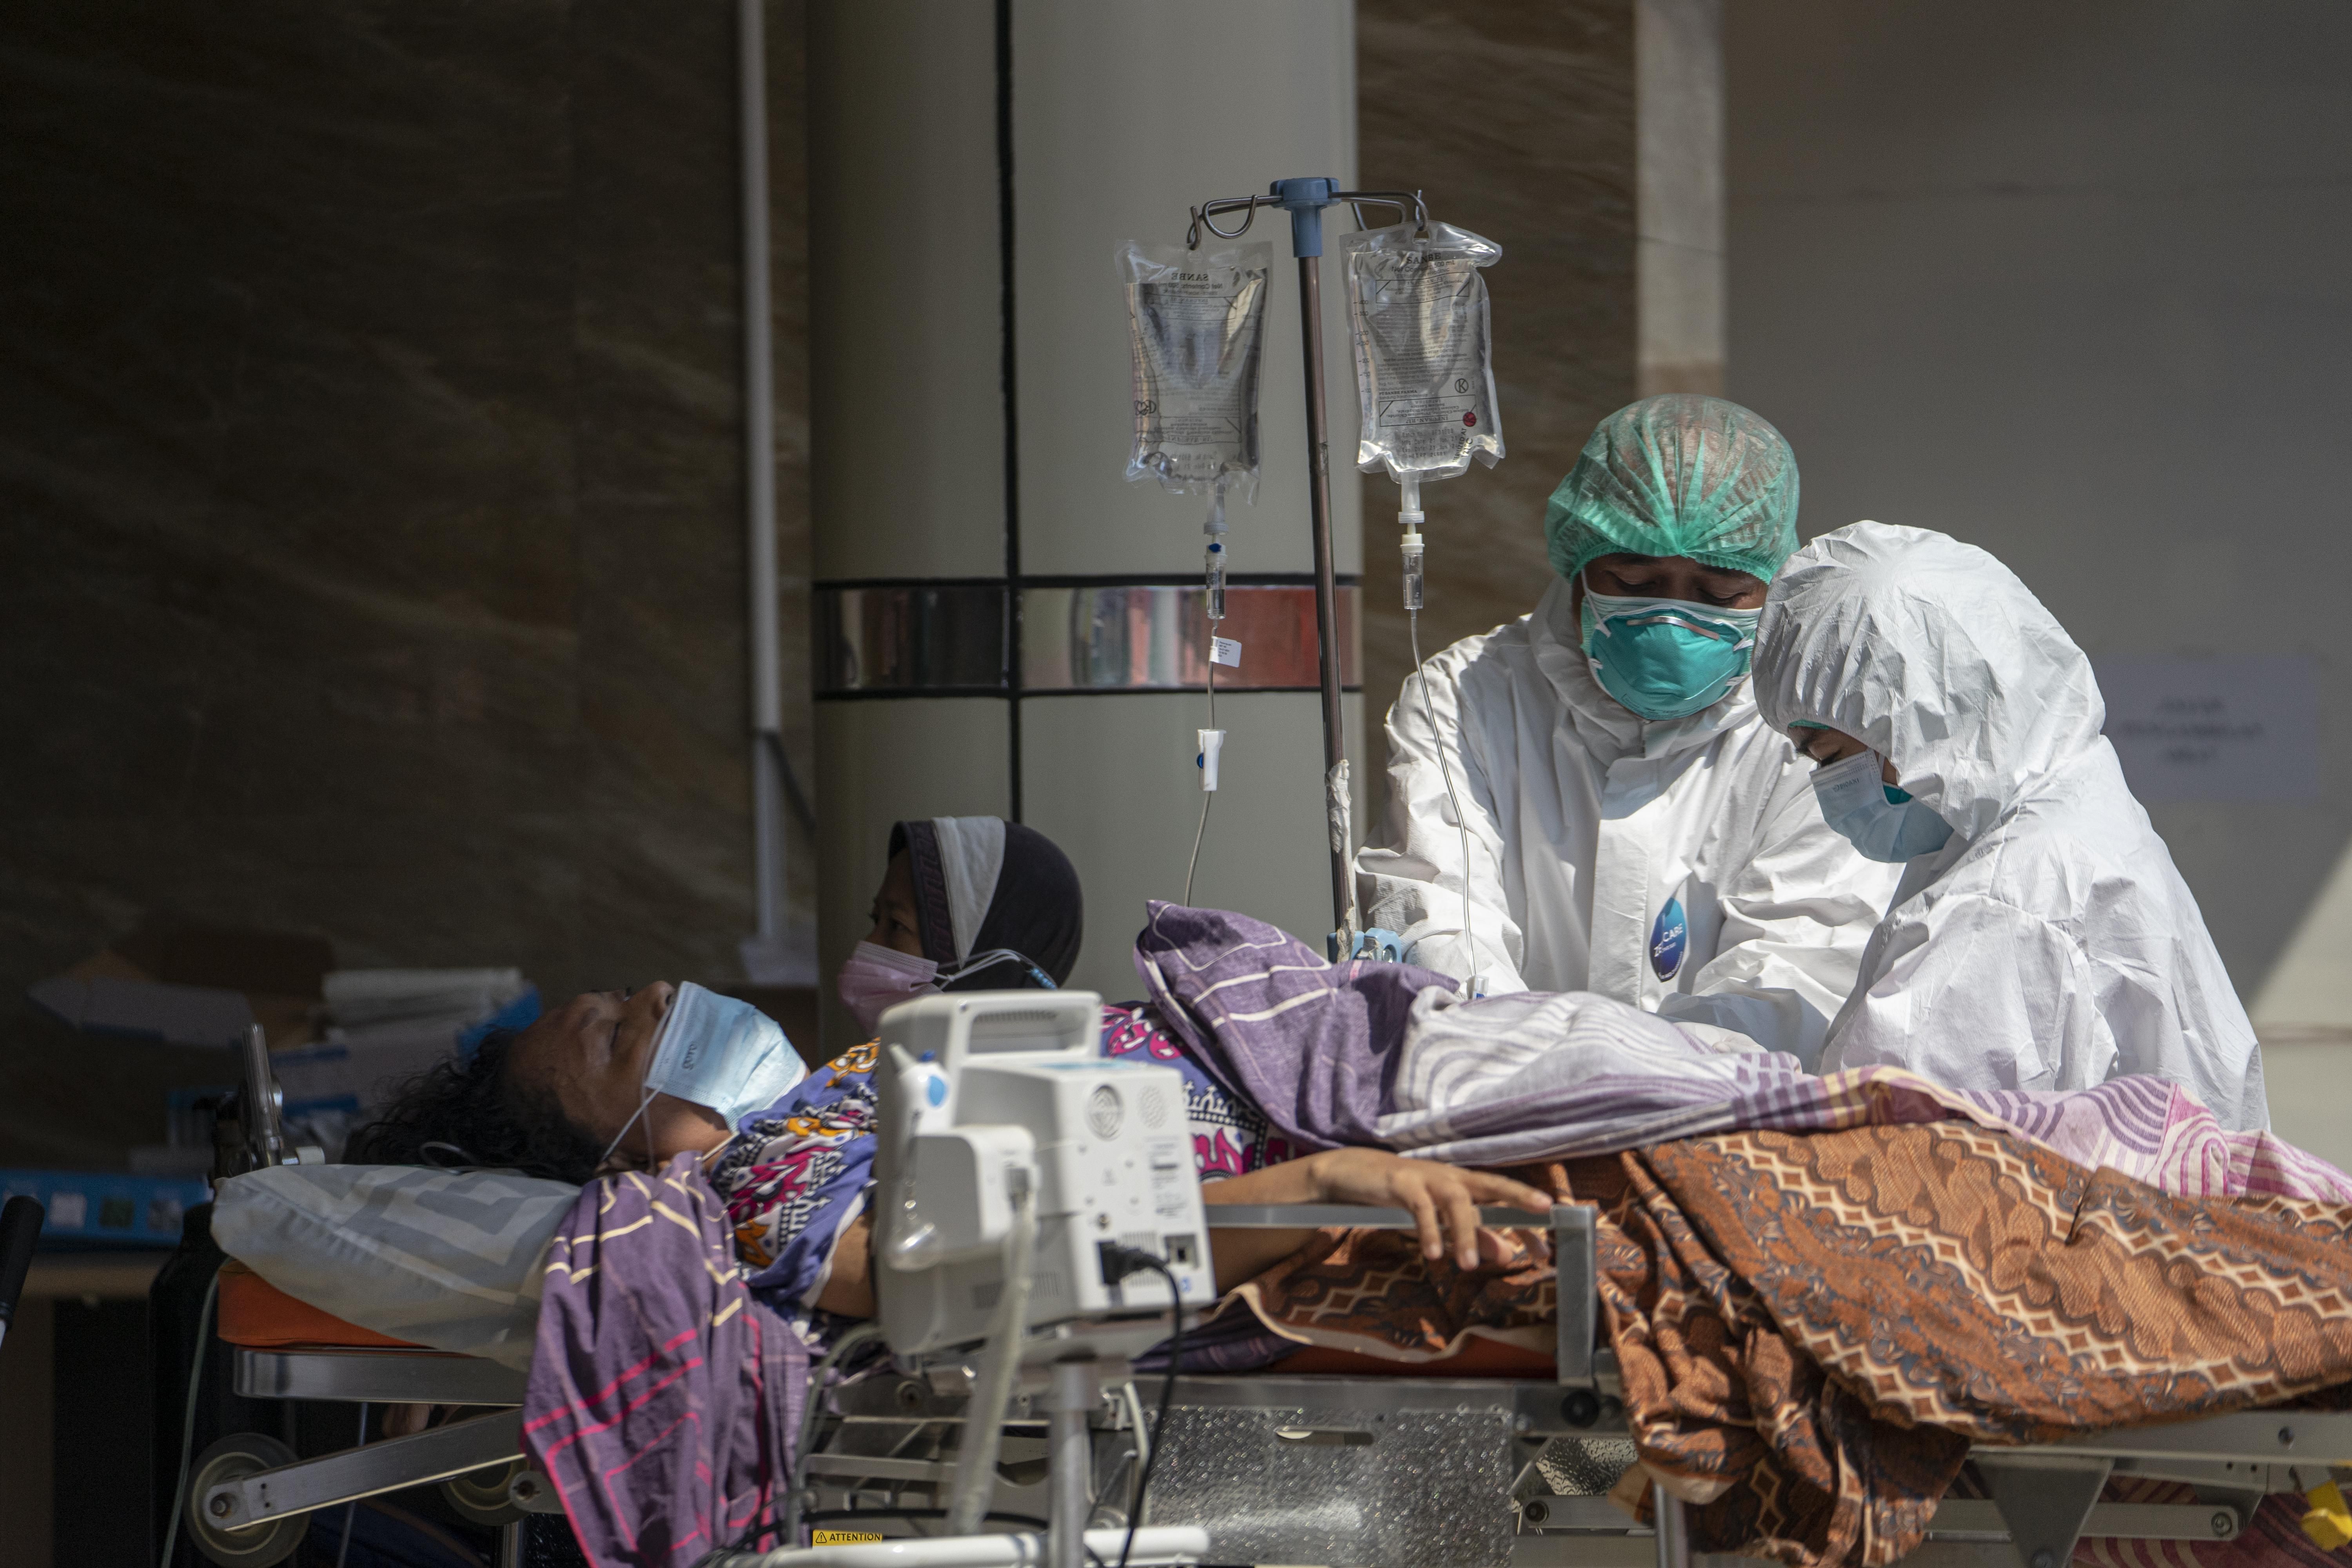 A patient receives treatment at a hospital in Indonesia